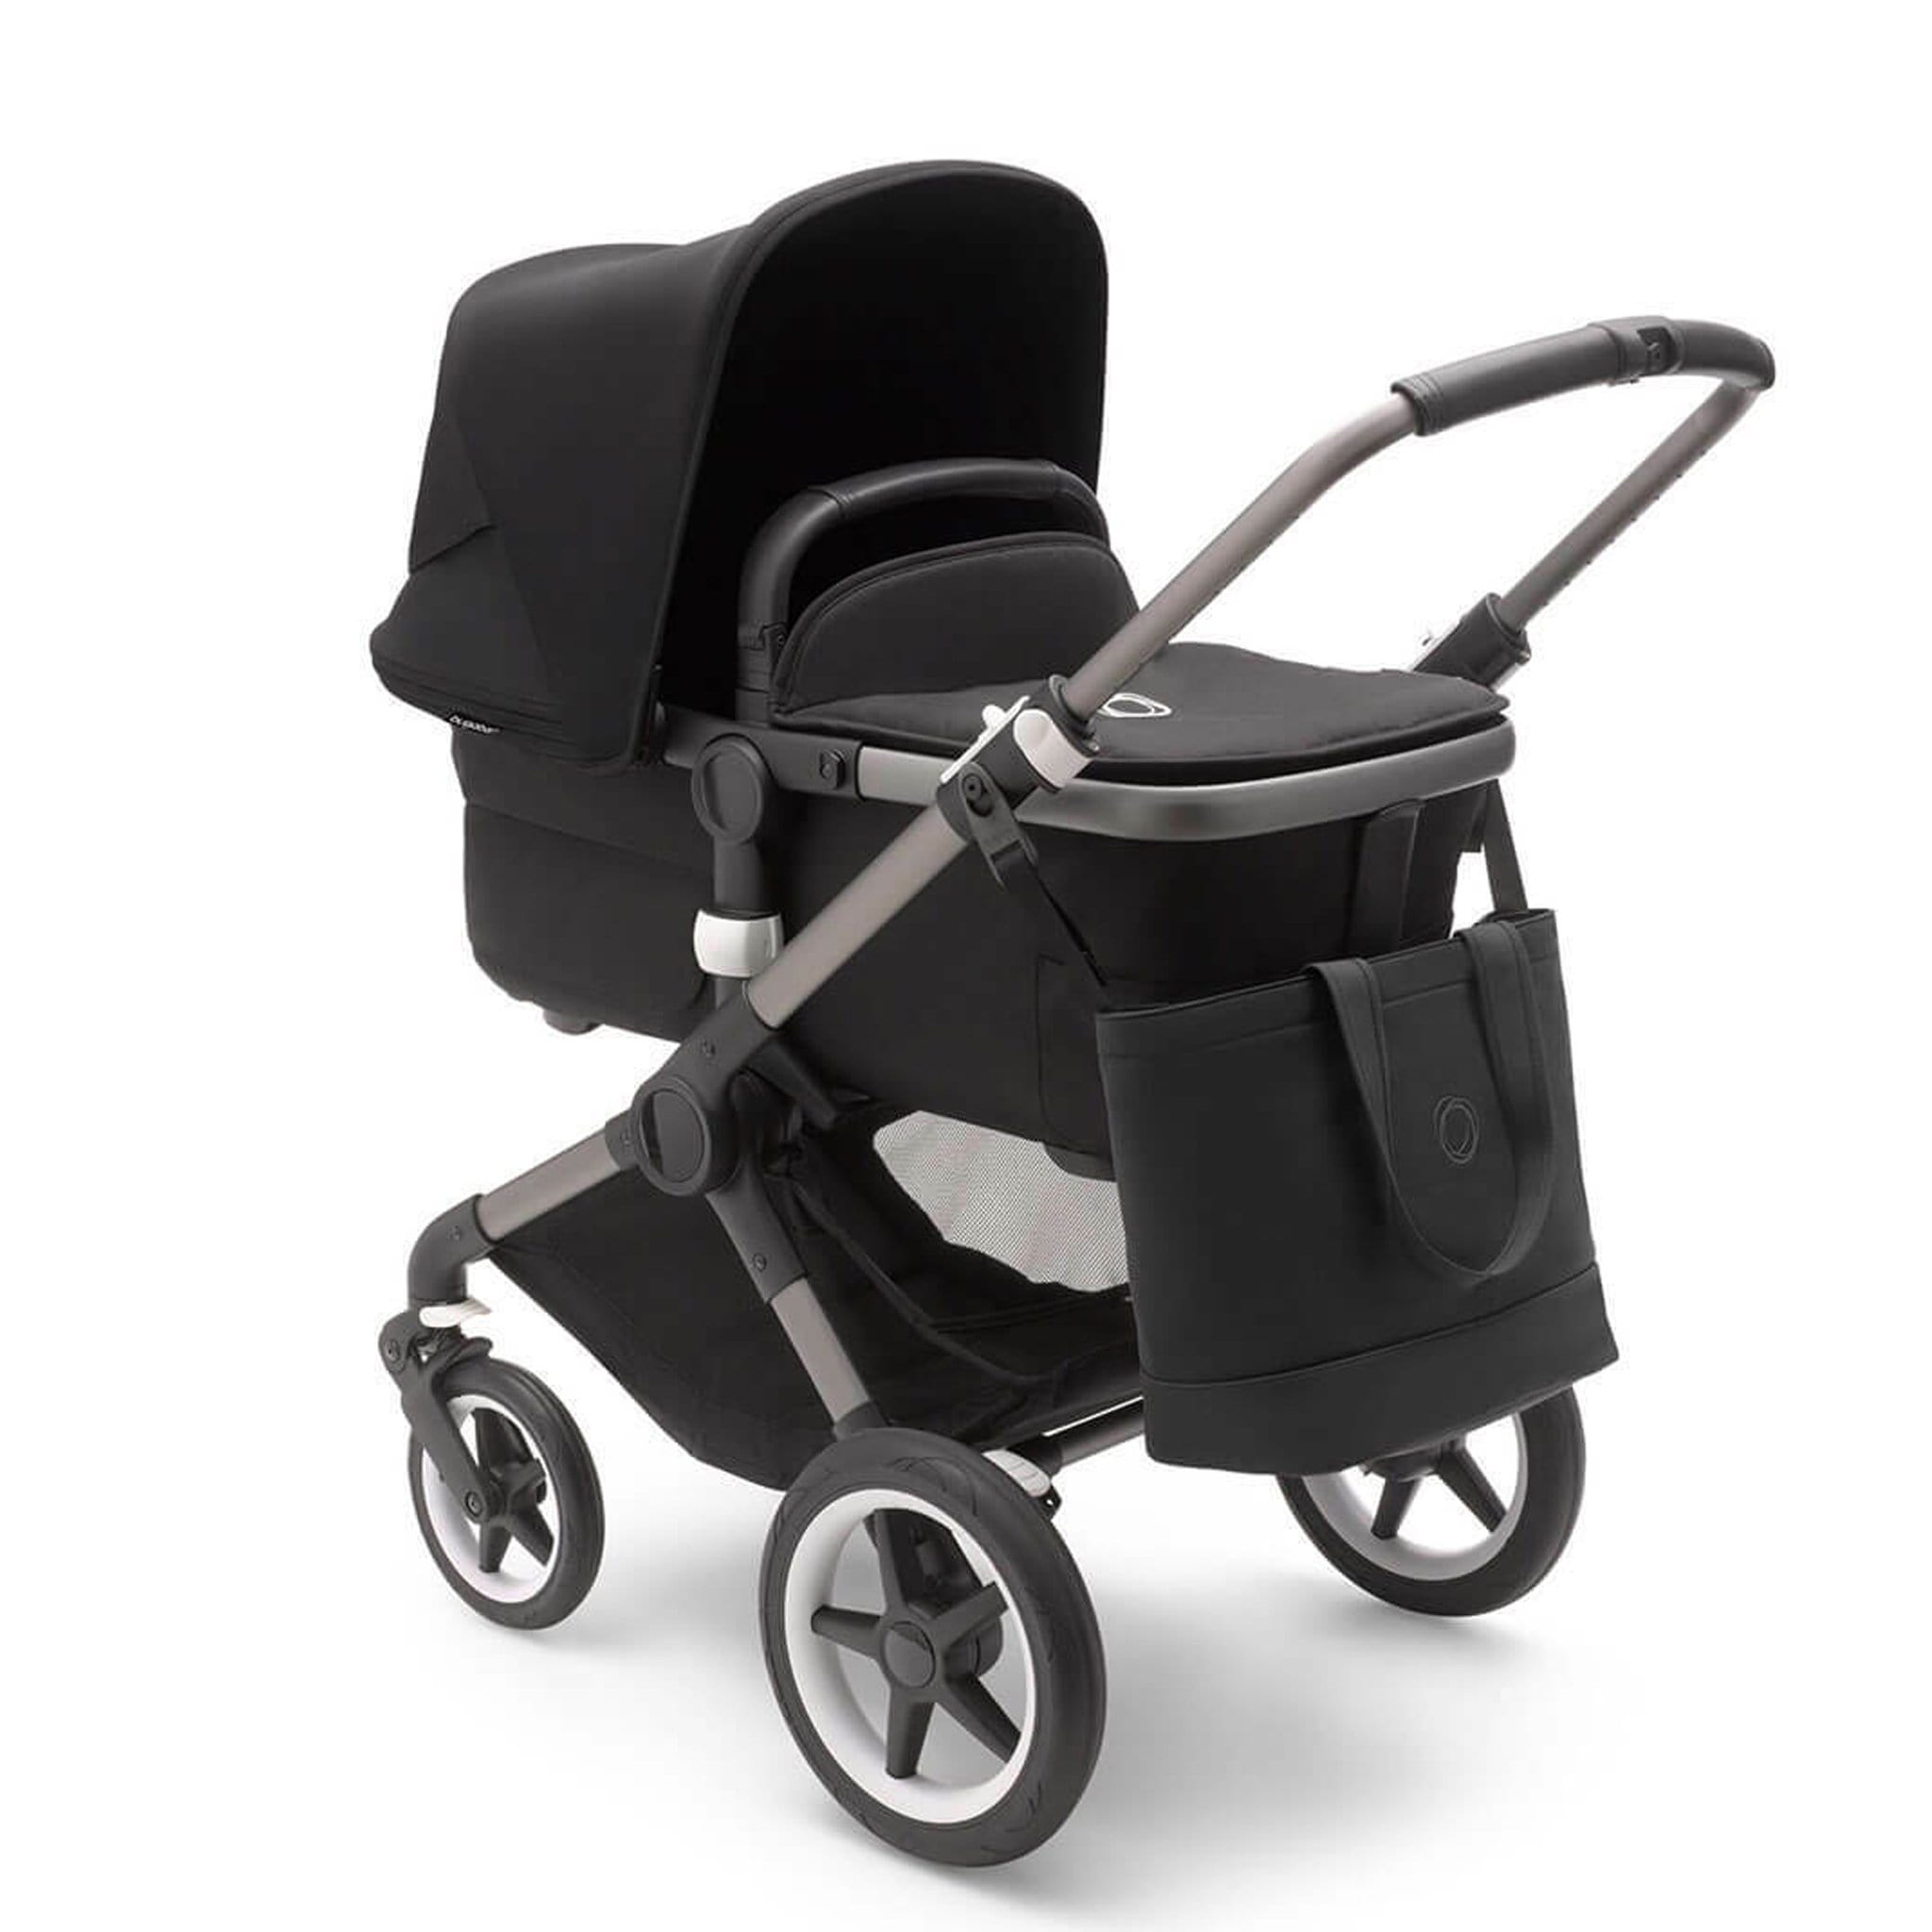 Bugaboo Changing Bag in Midnight Black Pram & Buggy Carry Bags 2306010088 8717447144168